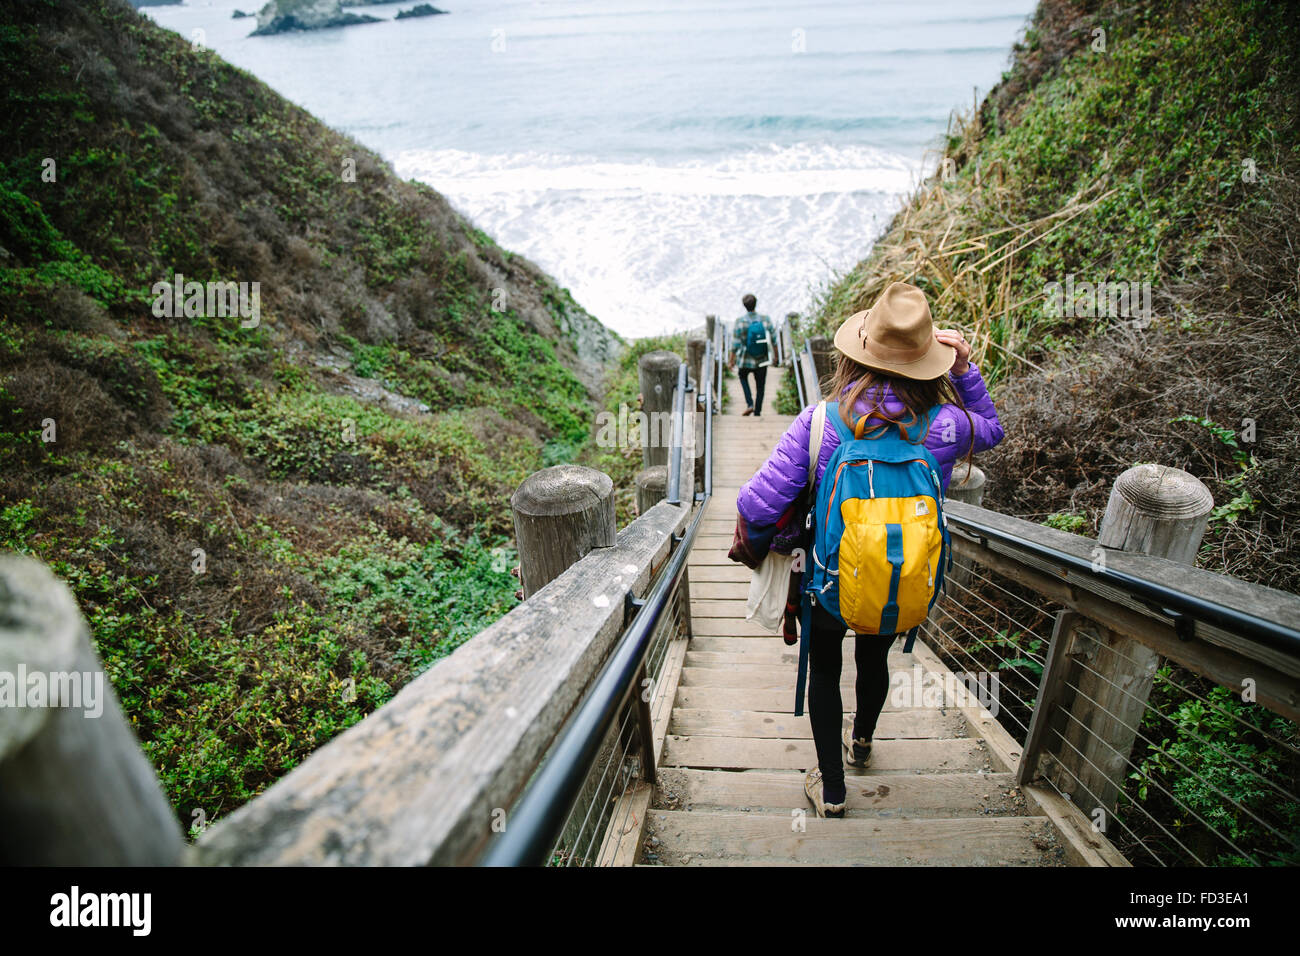 A young woman on an adventure in Big Sur, California. Stock Photo